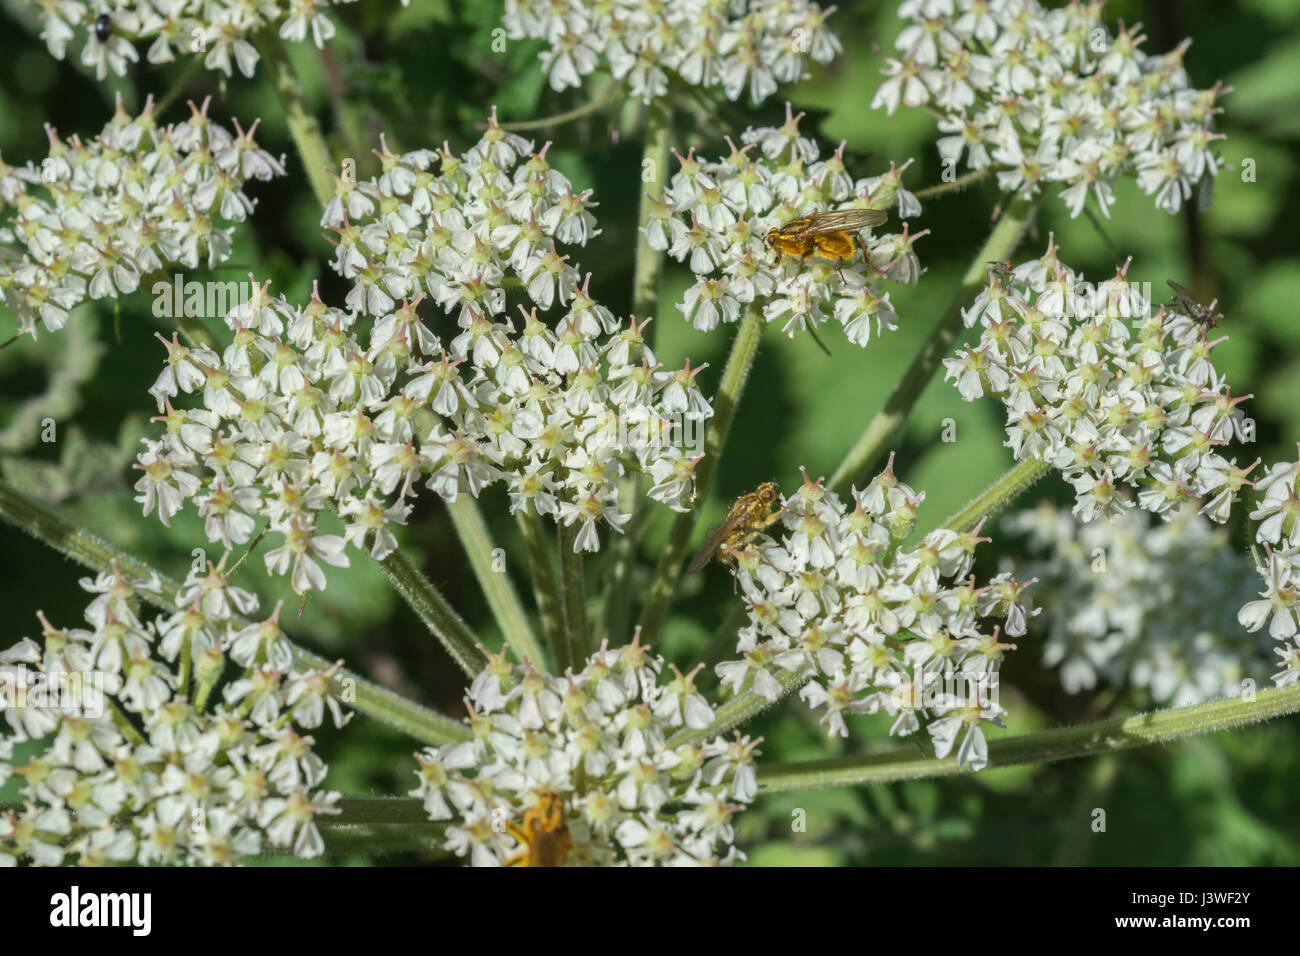 Hogweed / Cow Parsnip - Heracleum sphondylium - flower cluster with Yellow Dung Fly / Scathophaga sterconia feeding on nectar. Stock Photo